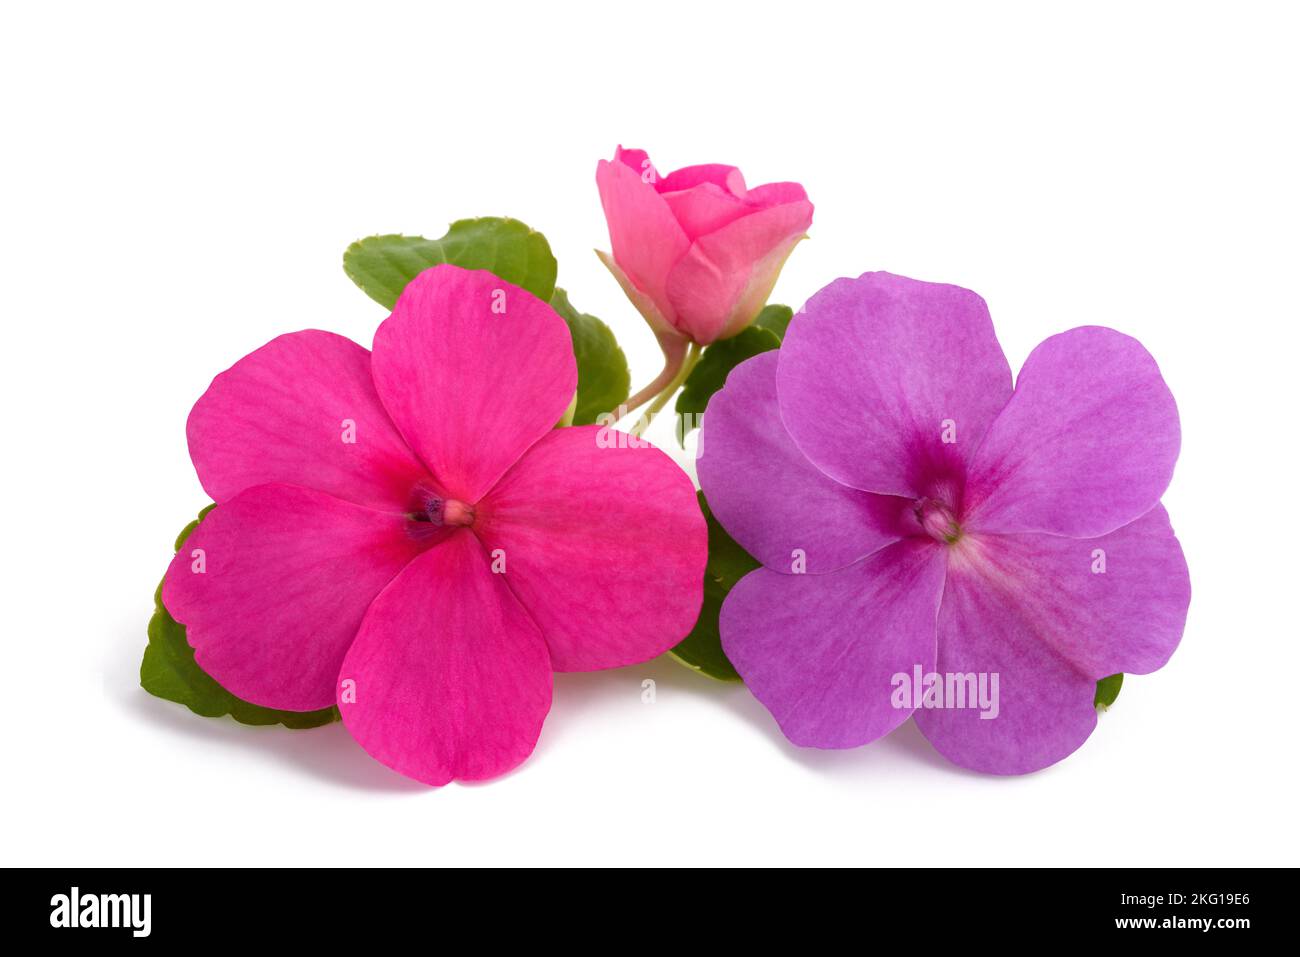 Impatiens flowers isolated on white background Stock Photo